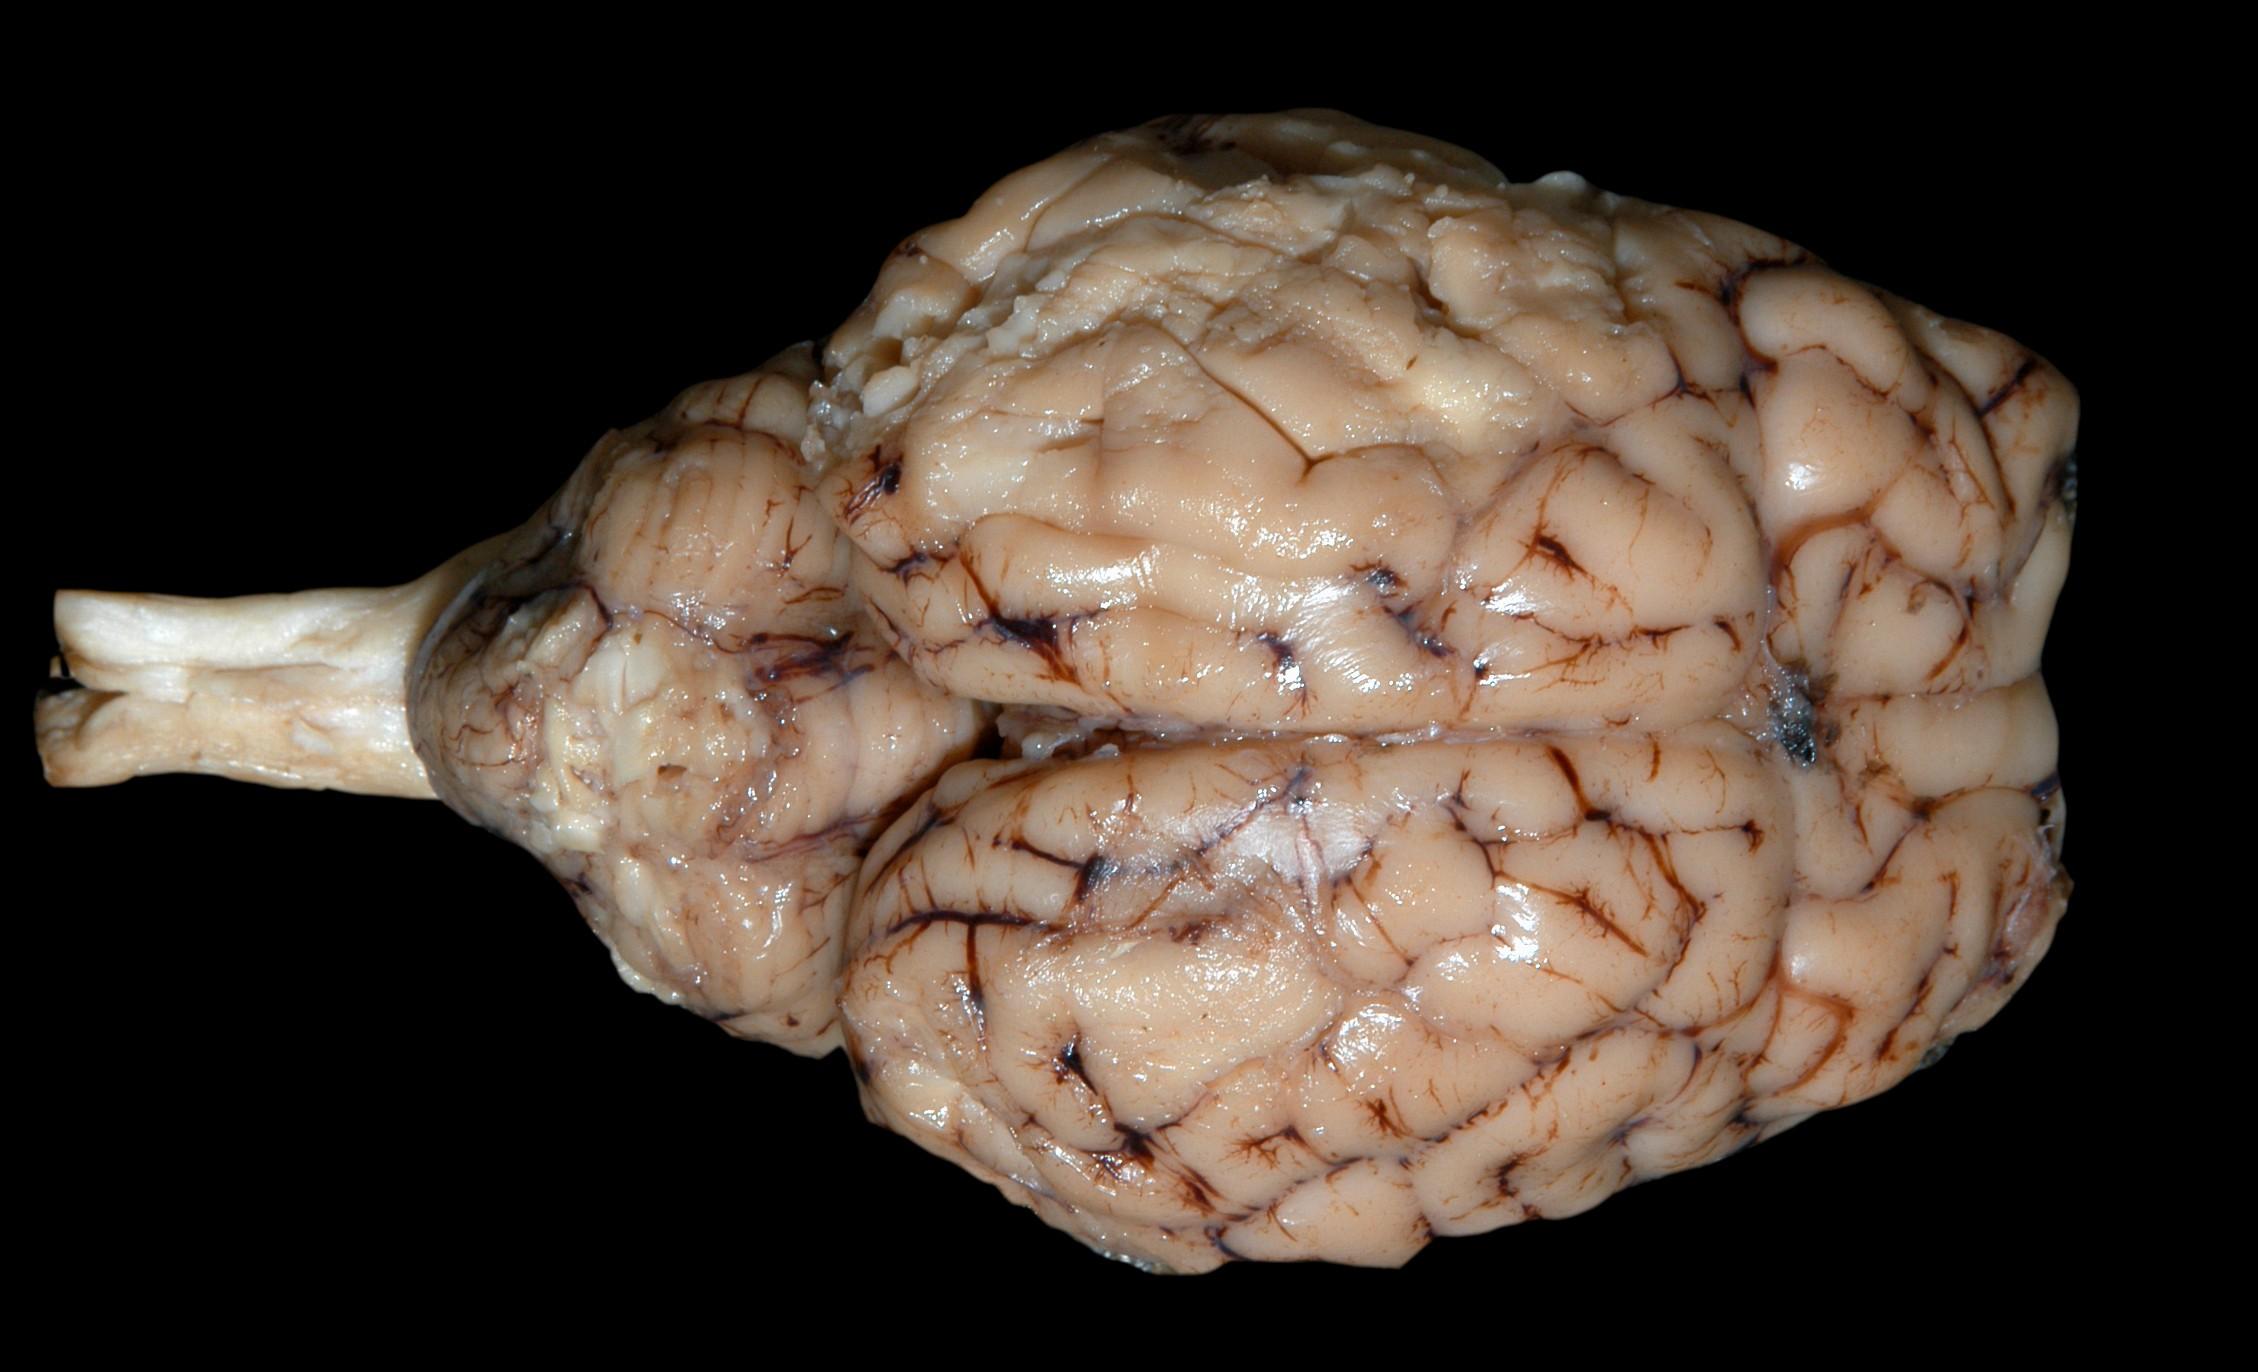 Lab Sheep Brain Images Amherst College